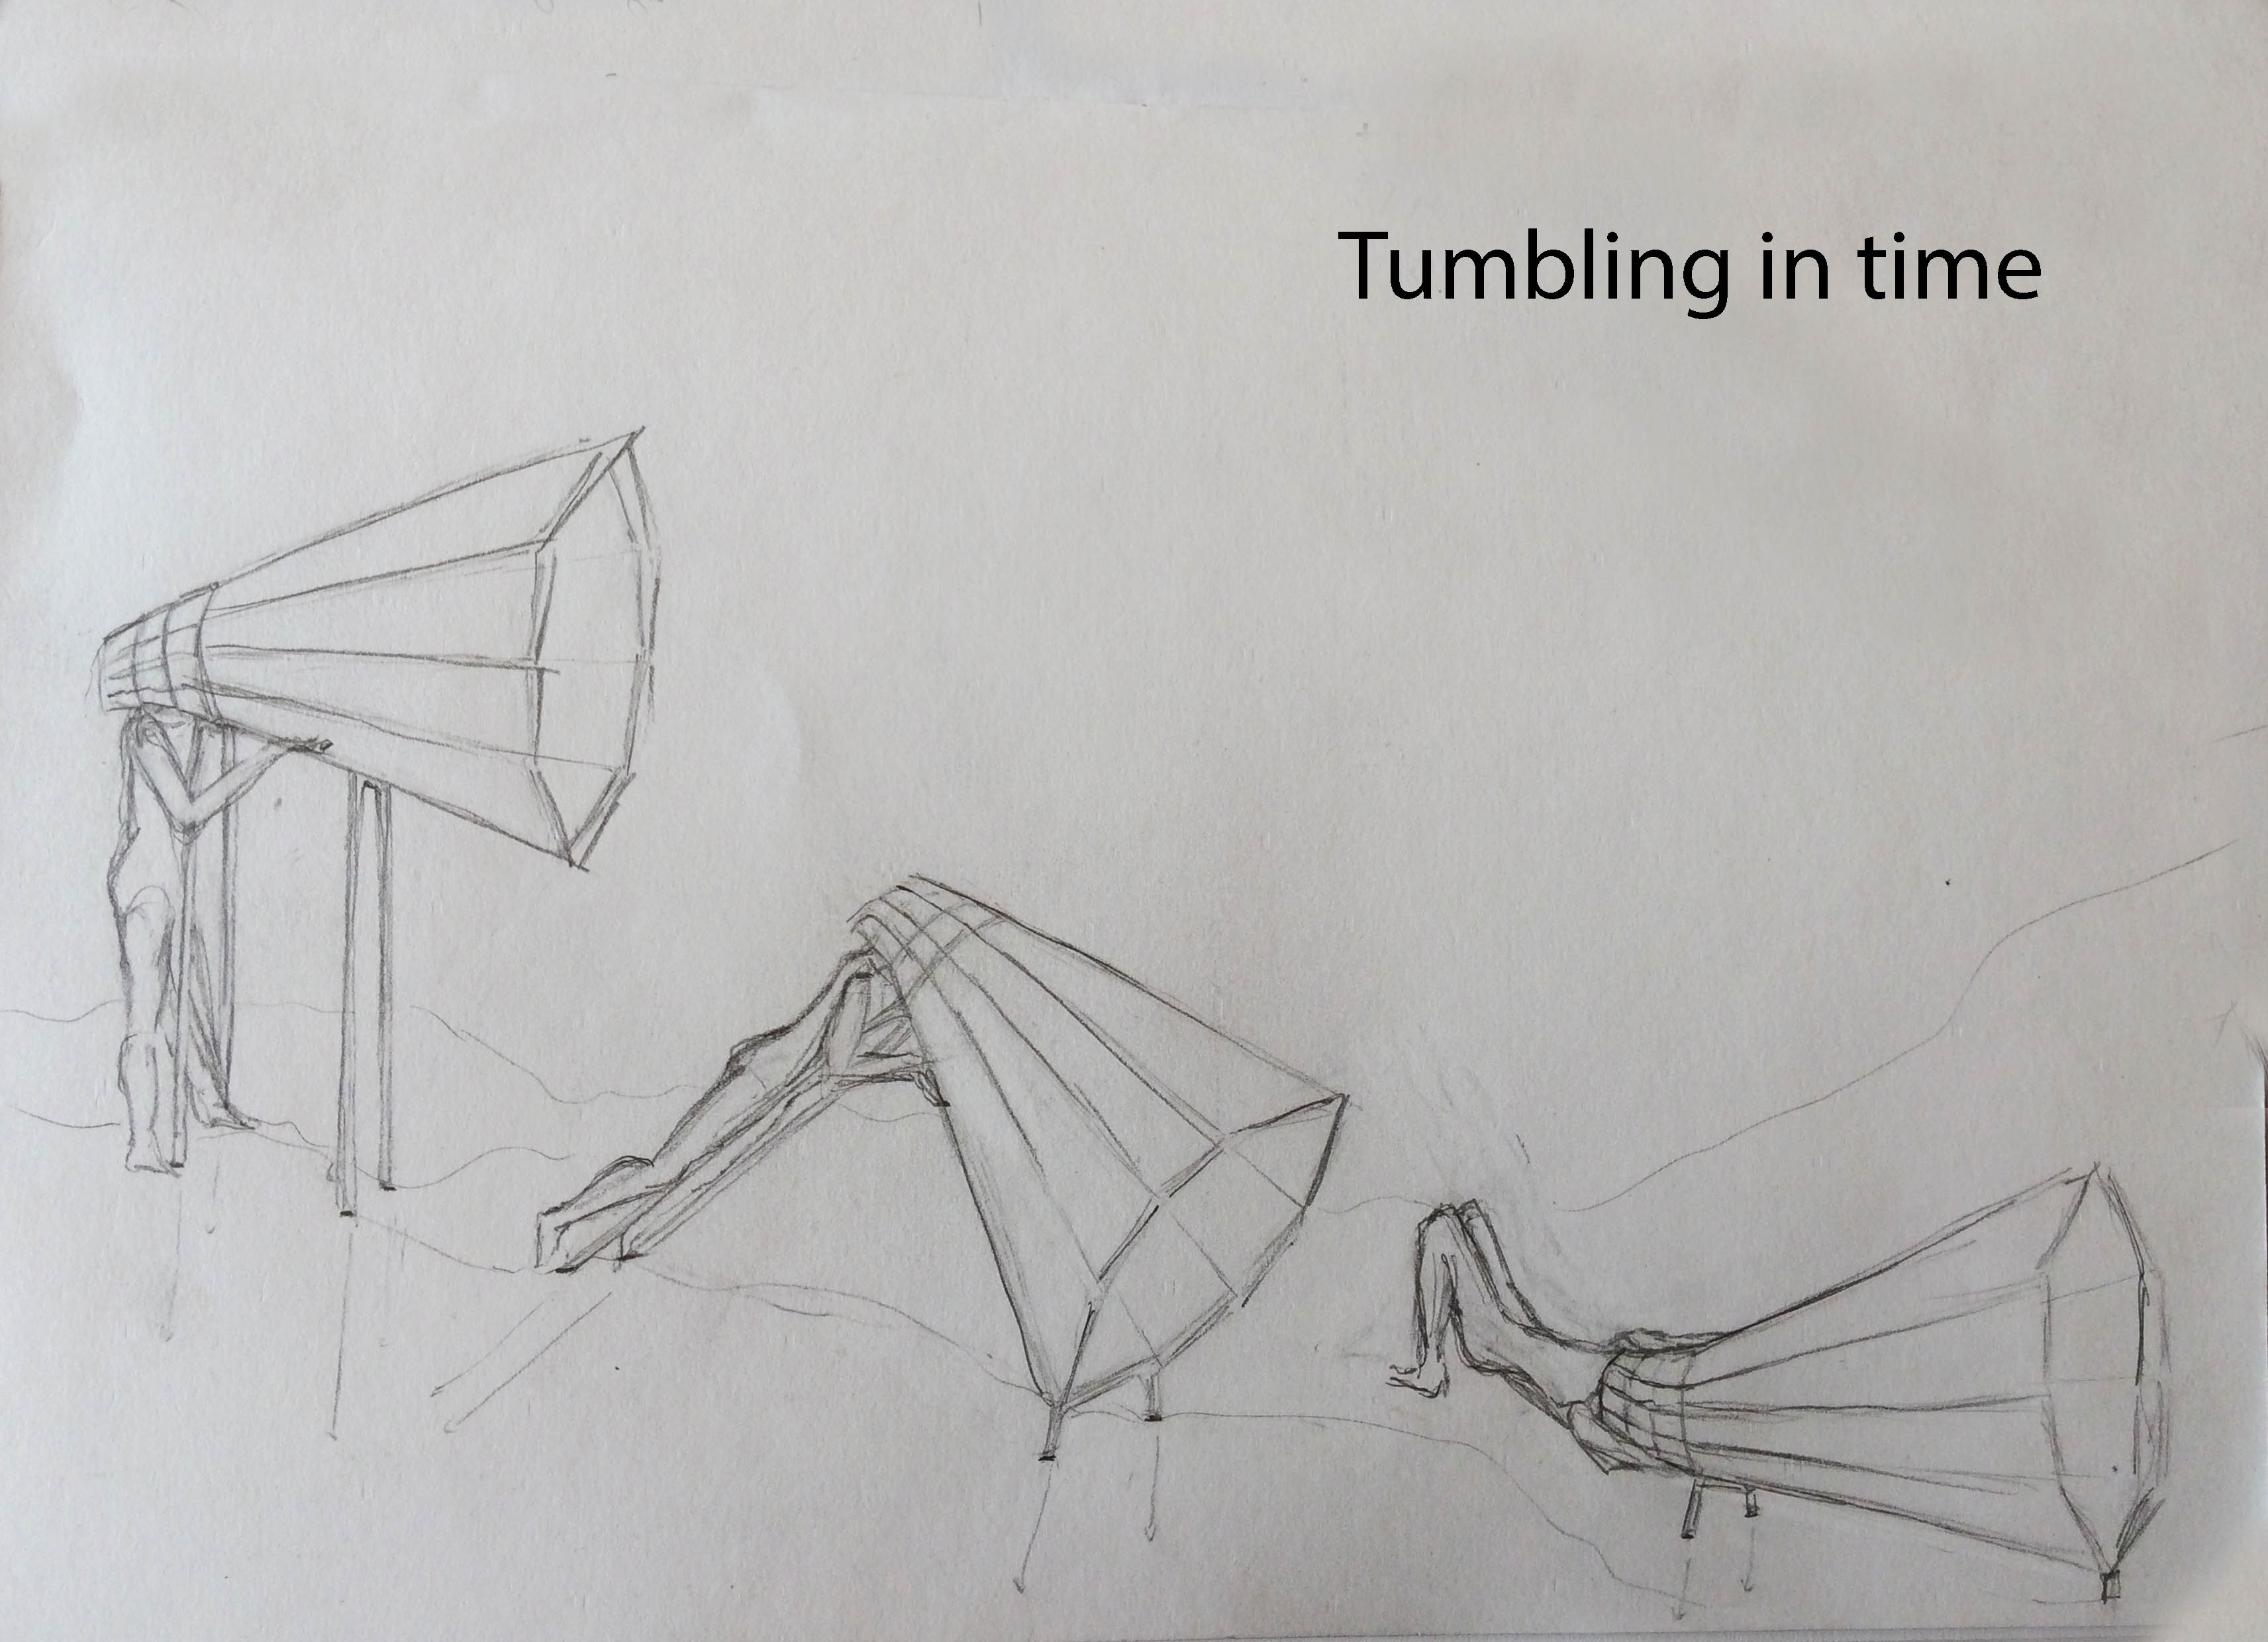 Tumbling in time - Moving Landscapes